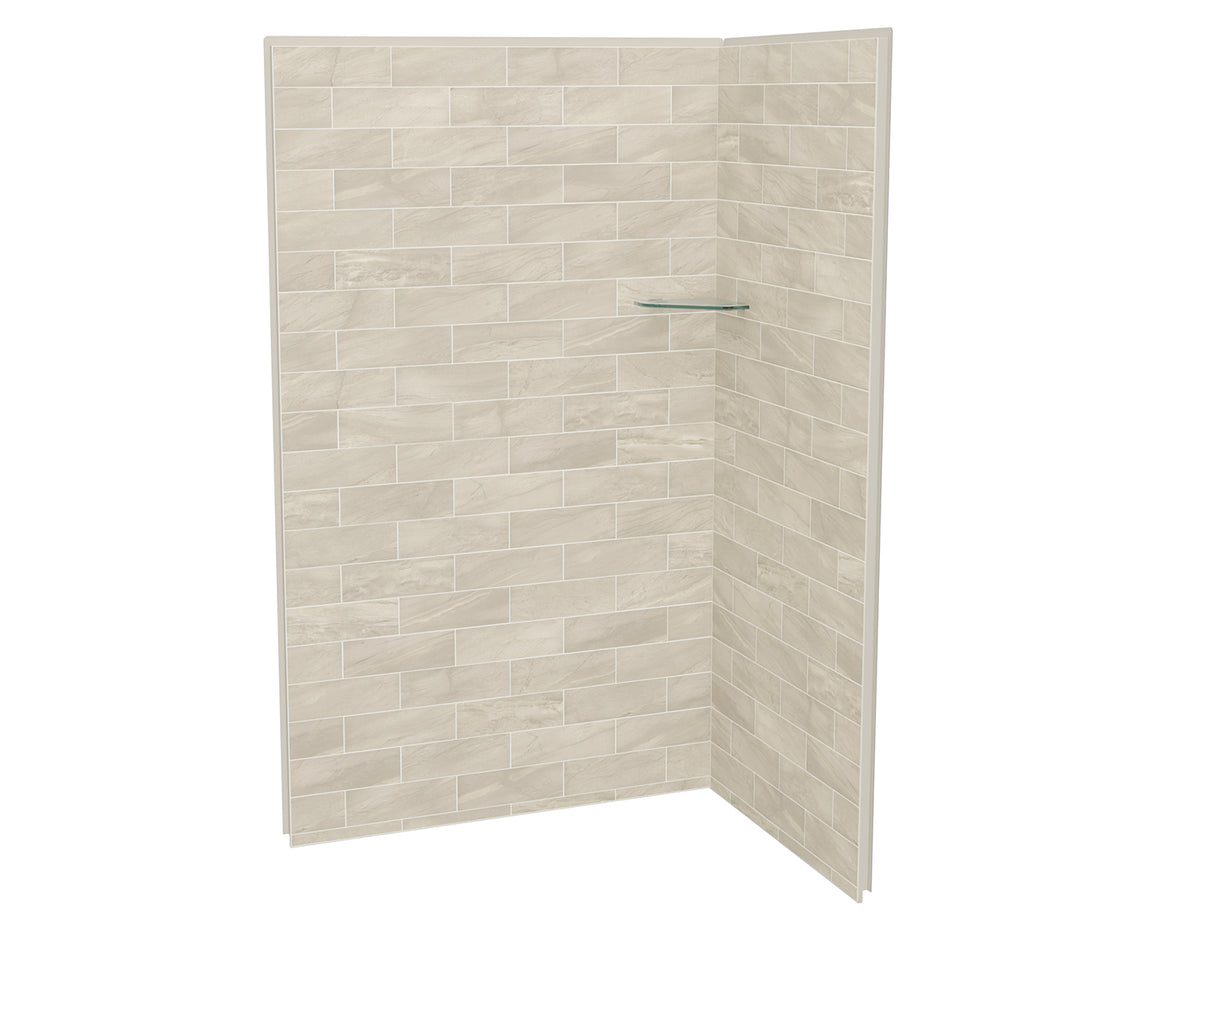 MAAX 107462-312-507 Utile 4836 Composite Direct-to-Stud Two-Piece Corner Shower Wall Kit in Organik Loam